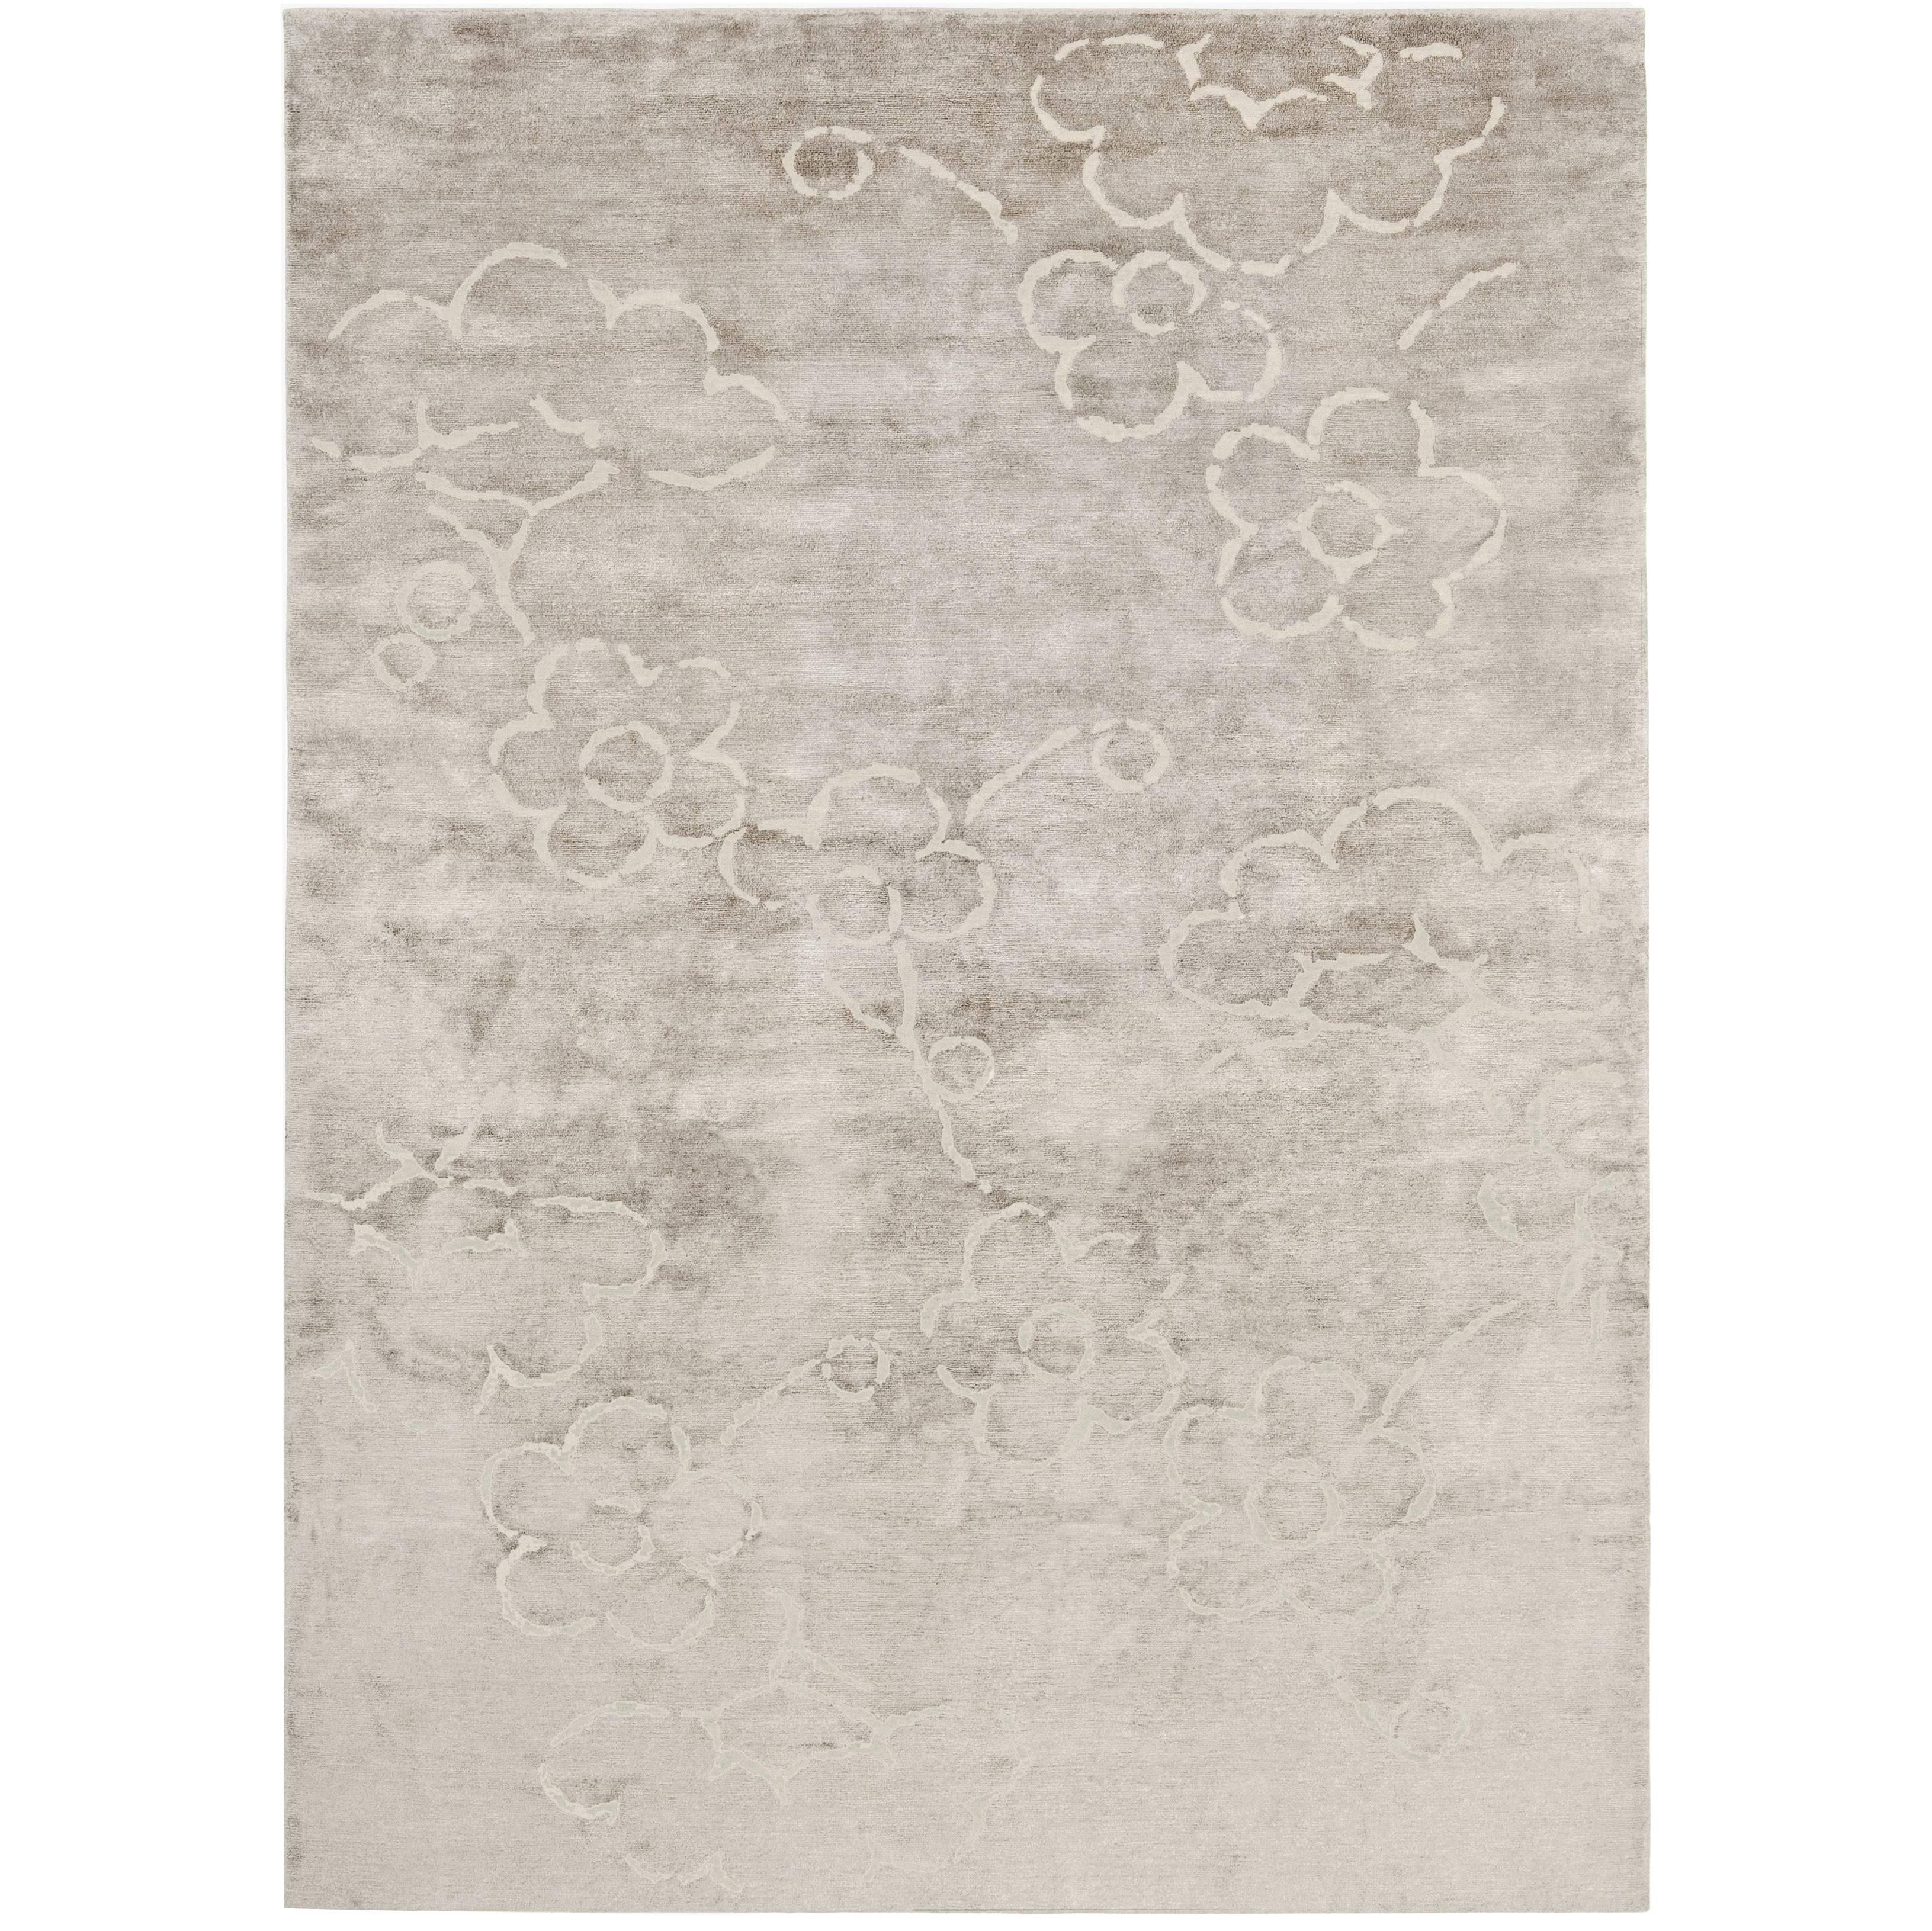 Contemporary Tibetan Rug Hand-Knotted in Nepal, Light Warm Grey - White For Sale